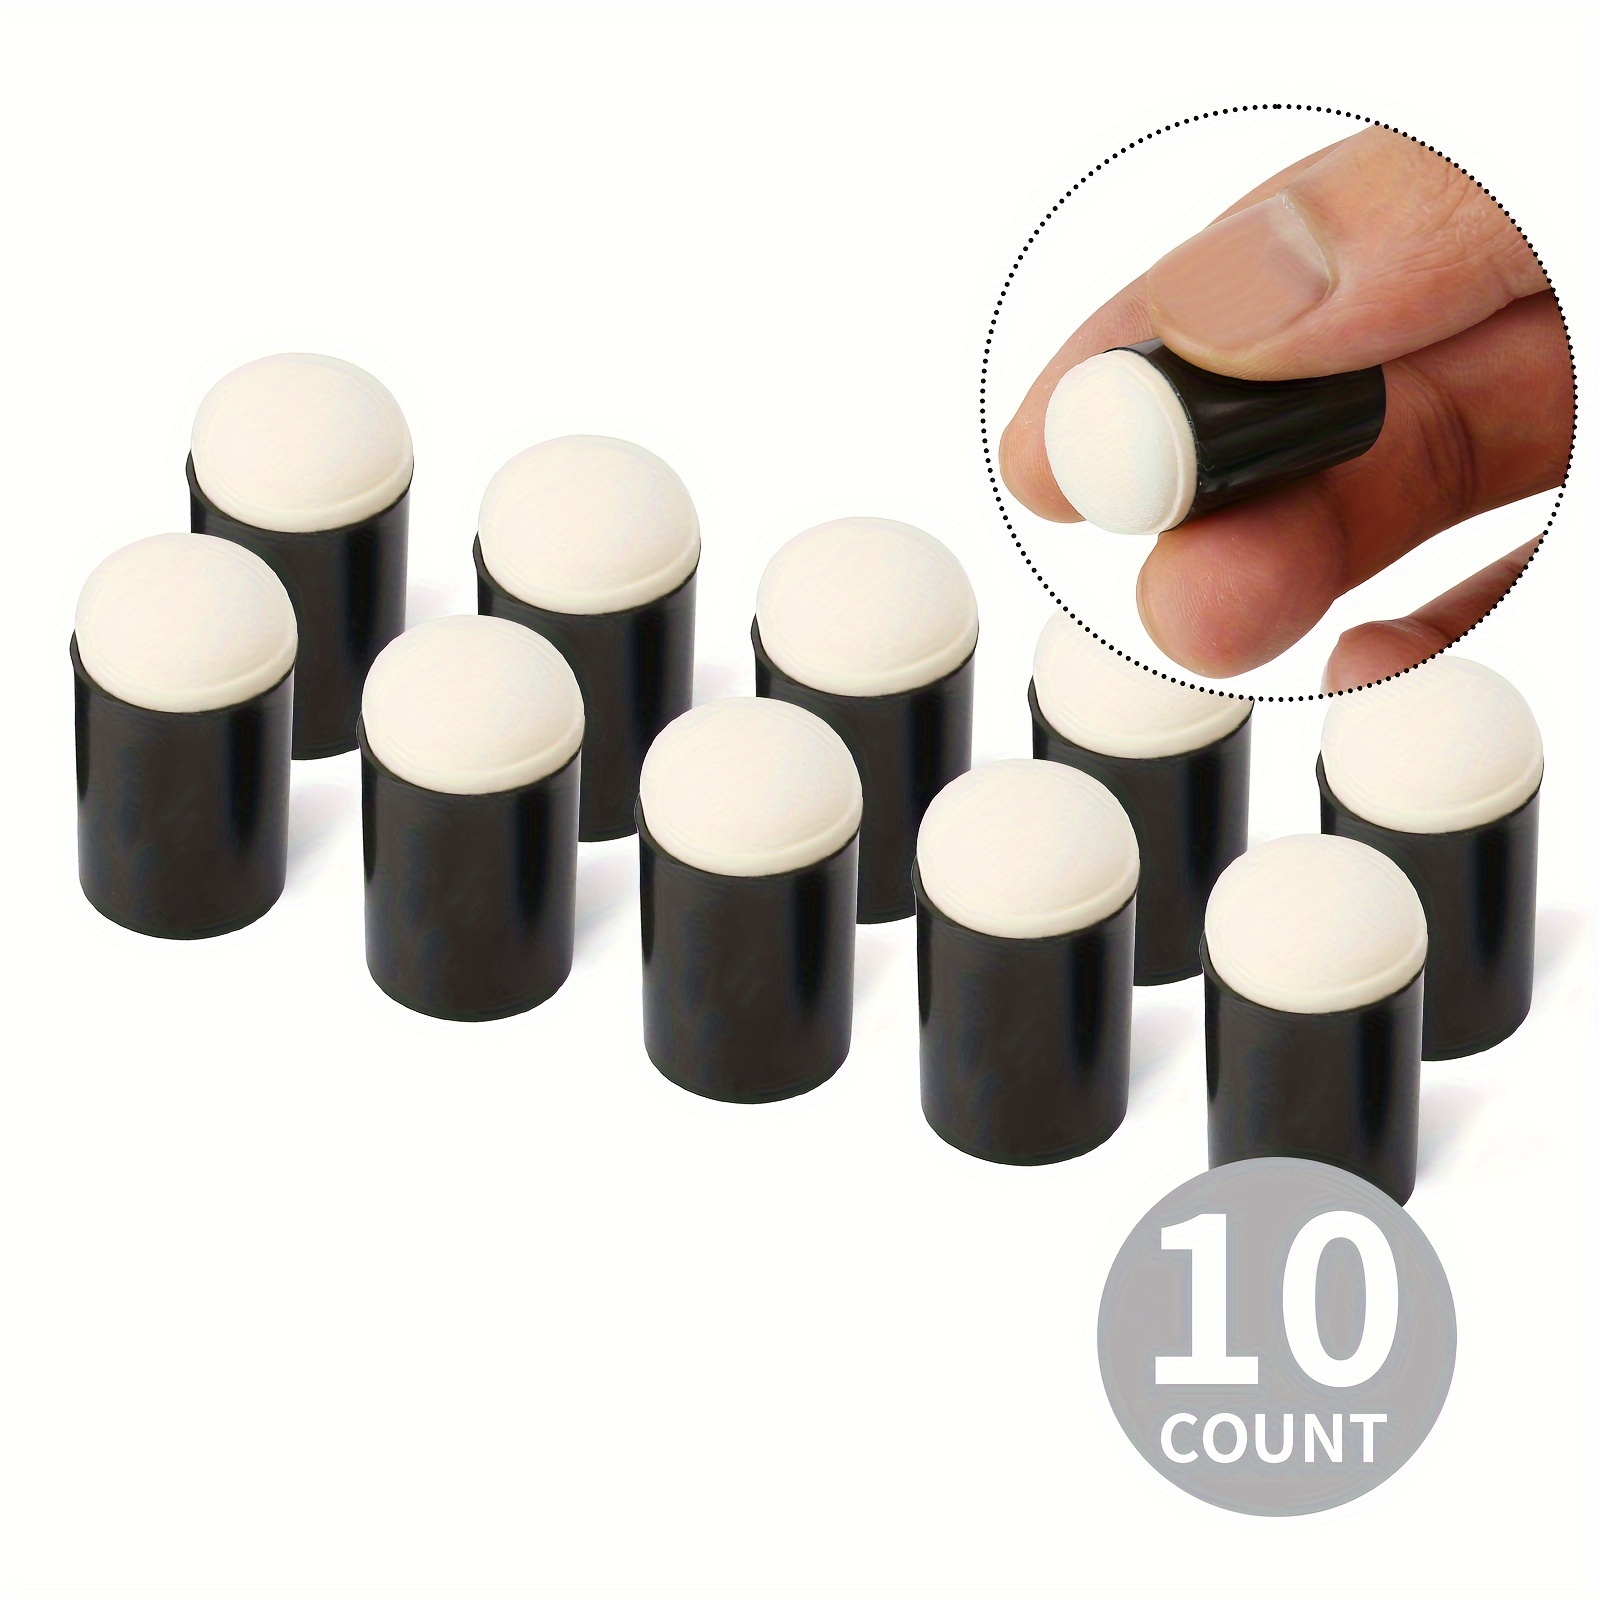 

10pcs Craft Finger Sponge Daubers Drawing Project Finger Painting Sponge Set For Card Making, Painting, Stamping, Ink